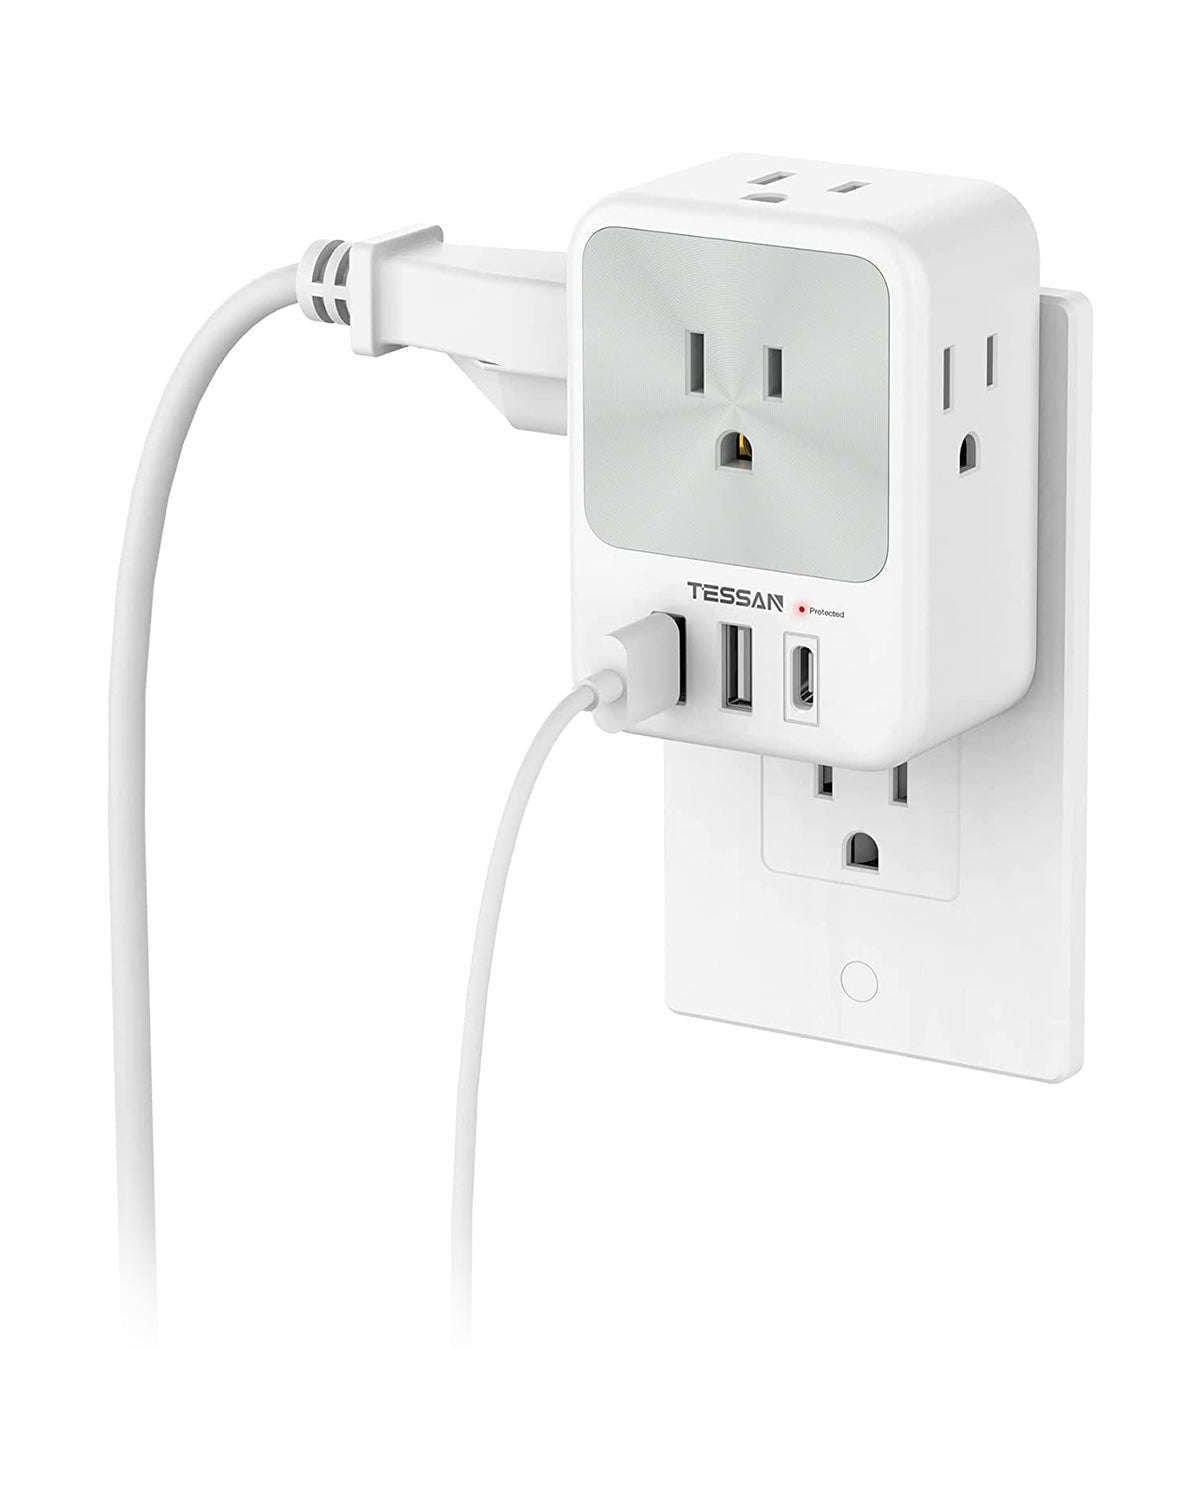 TESSAN Multi Plug Adapter Outlet Extender with 4 AC Outlets 3 USB Ports (1 USB C Port)